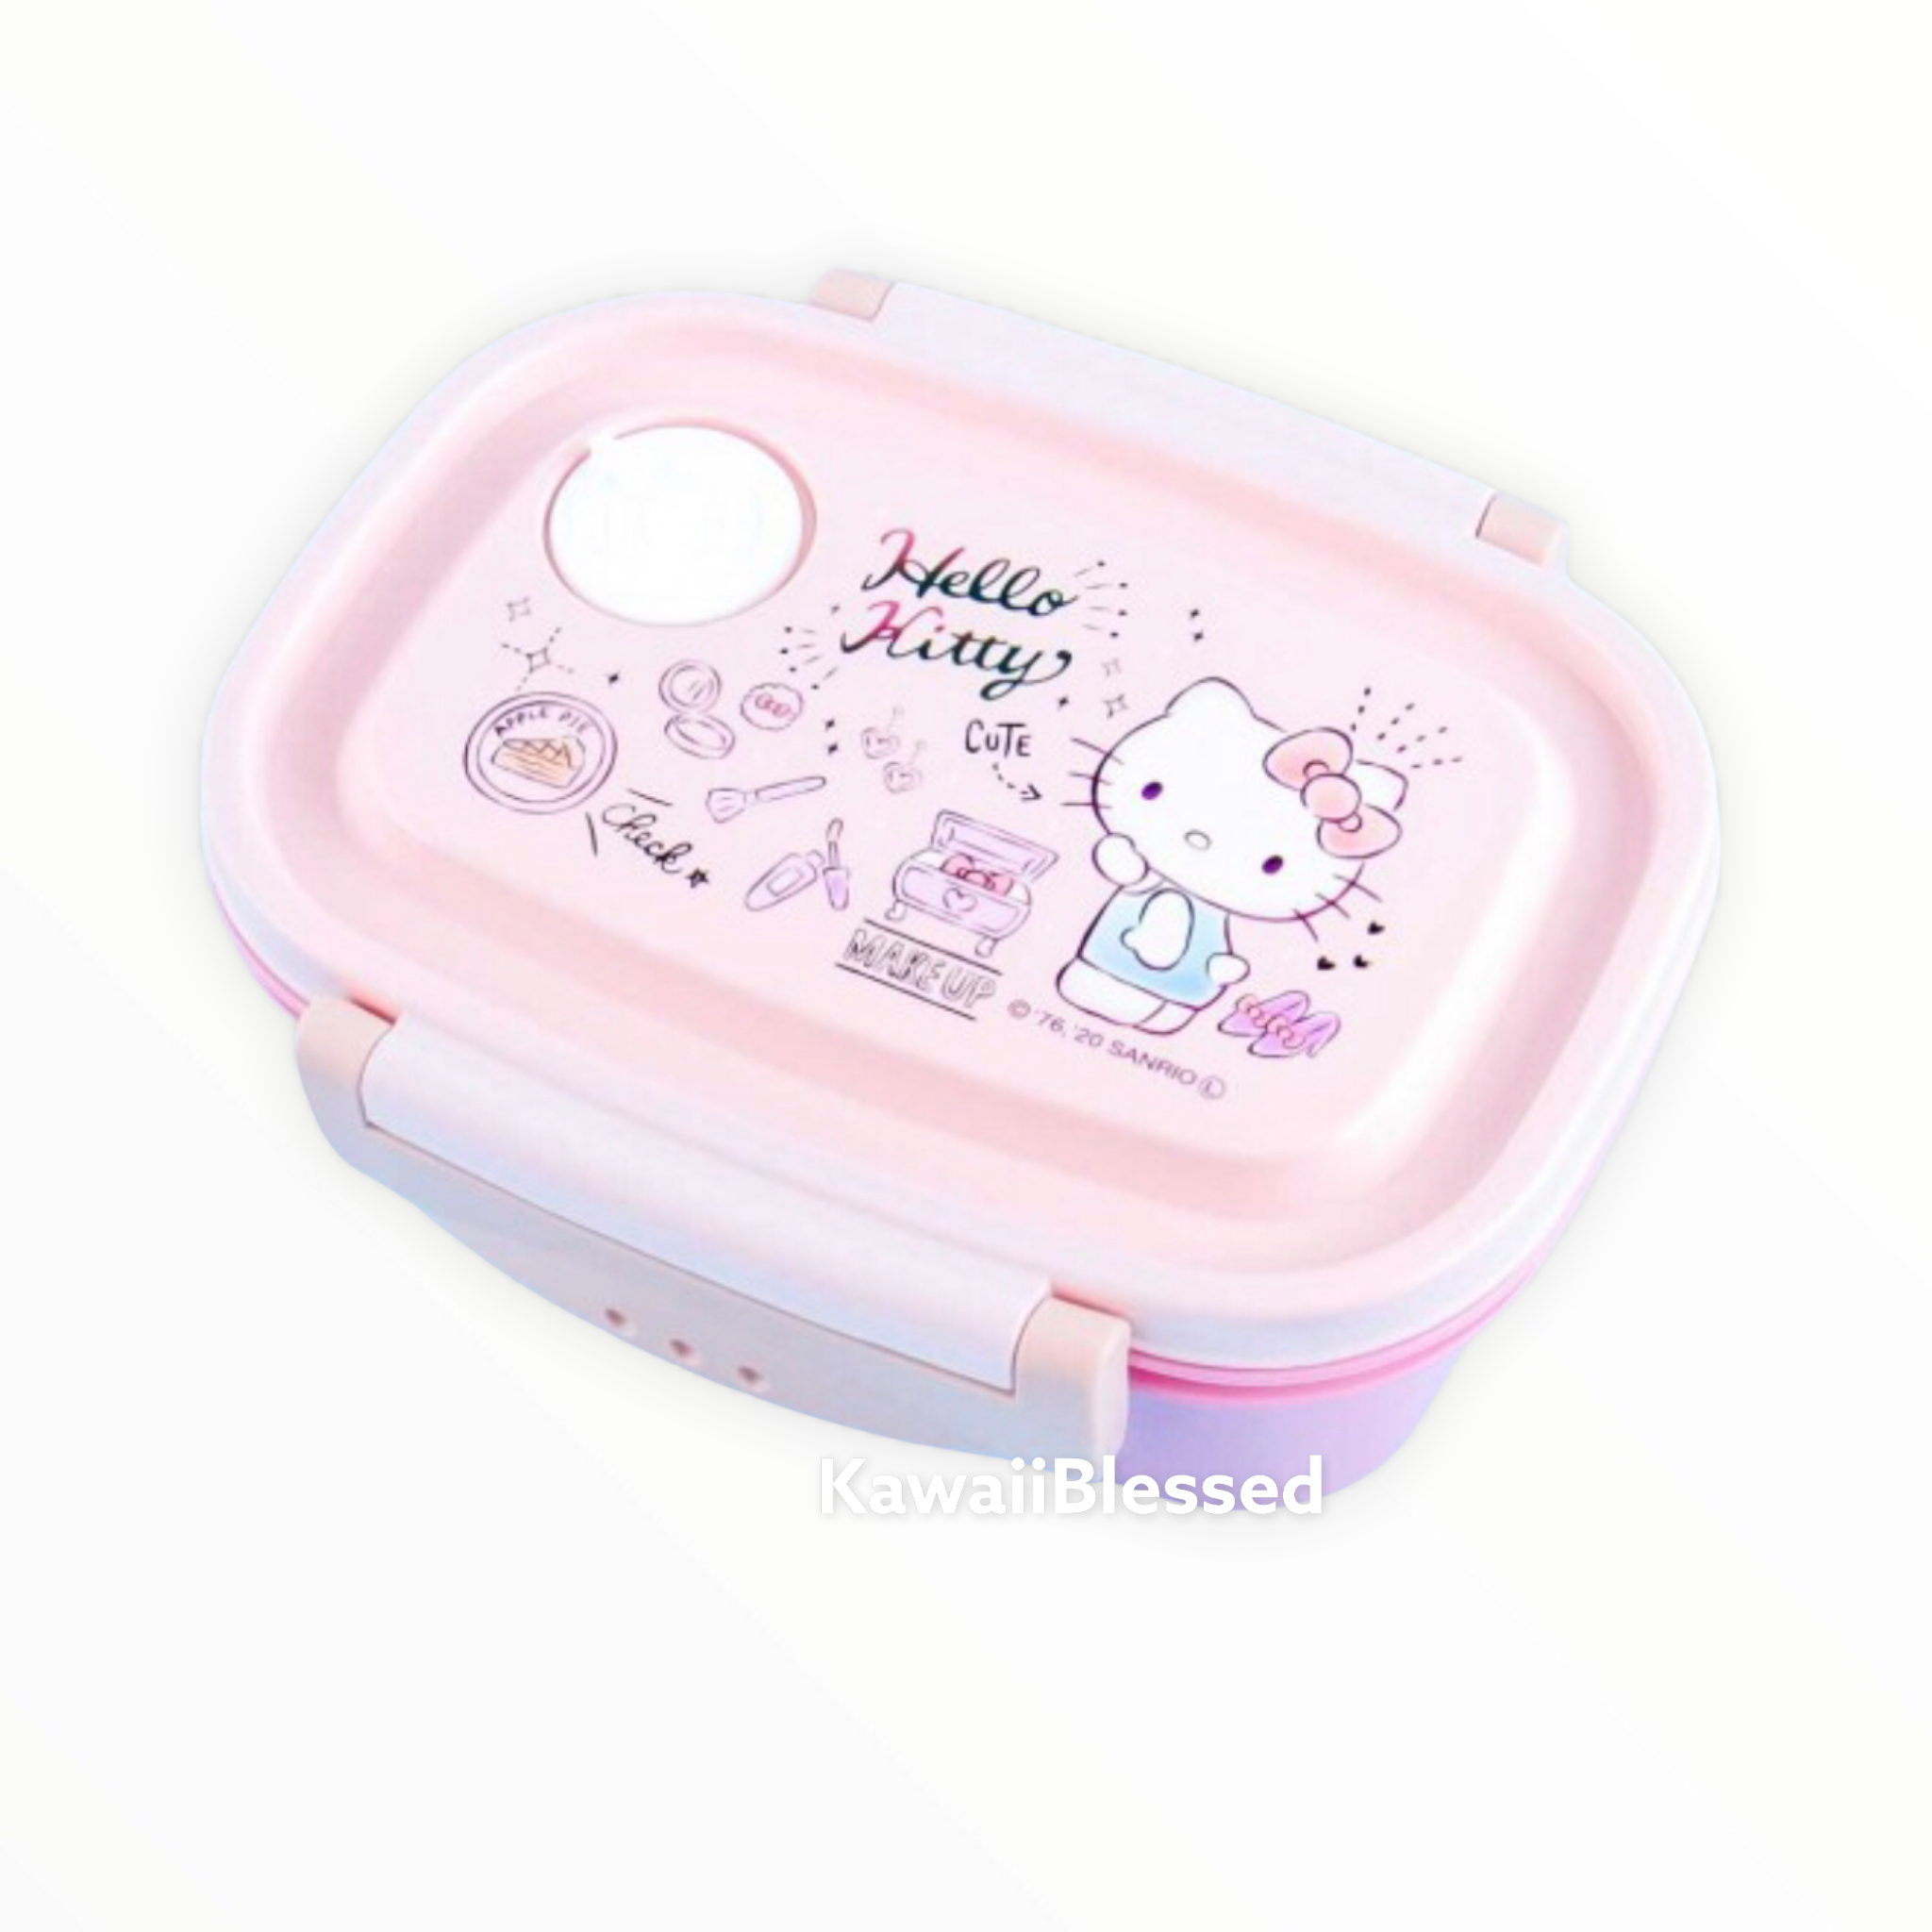 Hello Kitty Sweets Bento Lunch Box — Lost Objects, Found Treasures